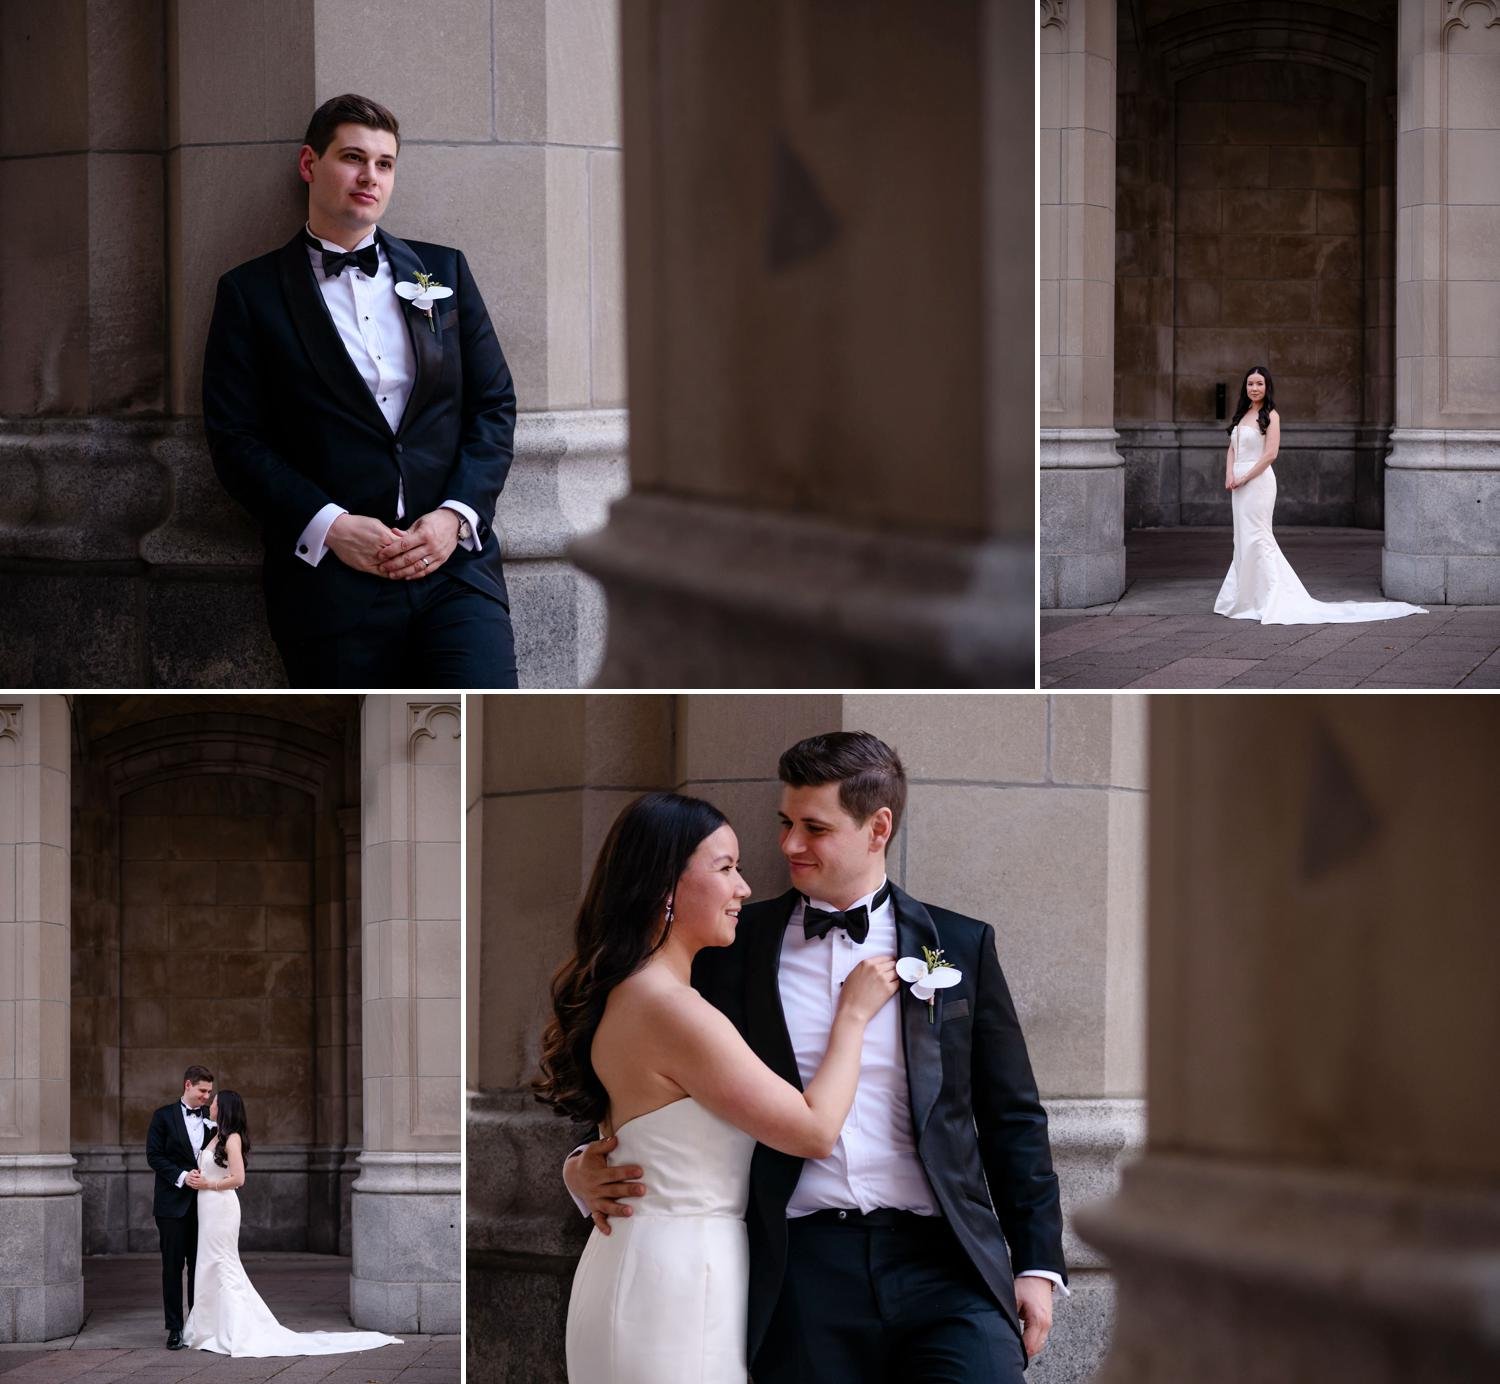 wedding photographs outside the chateau Laurier in downtown ottawa